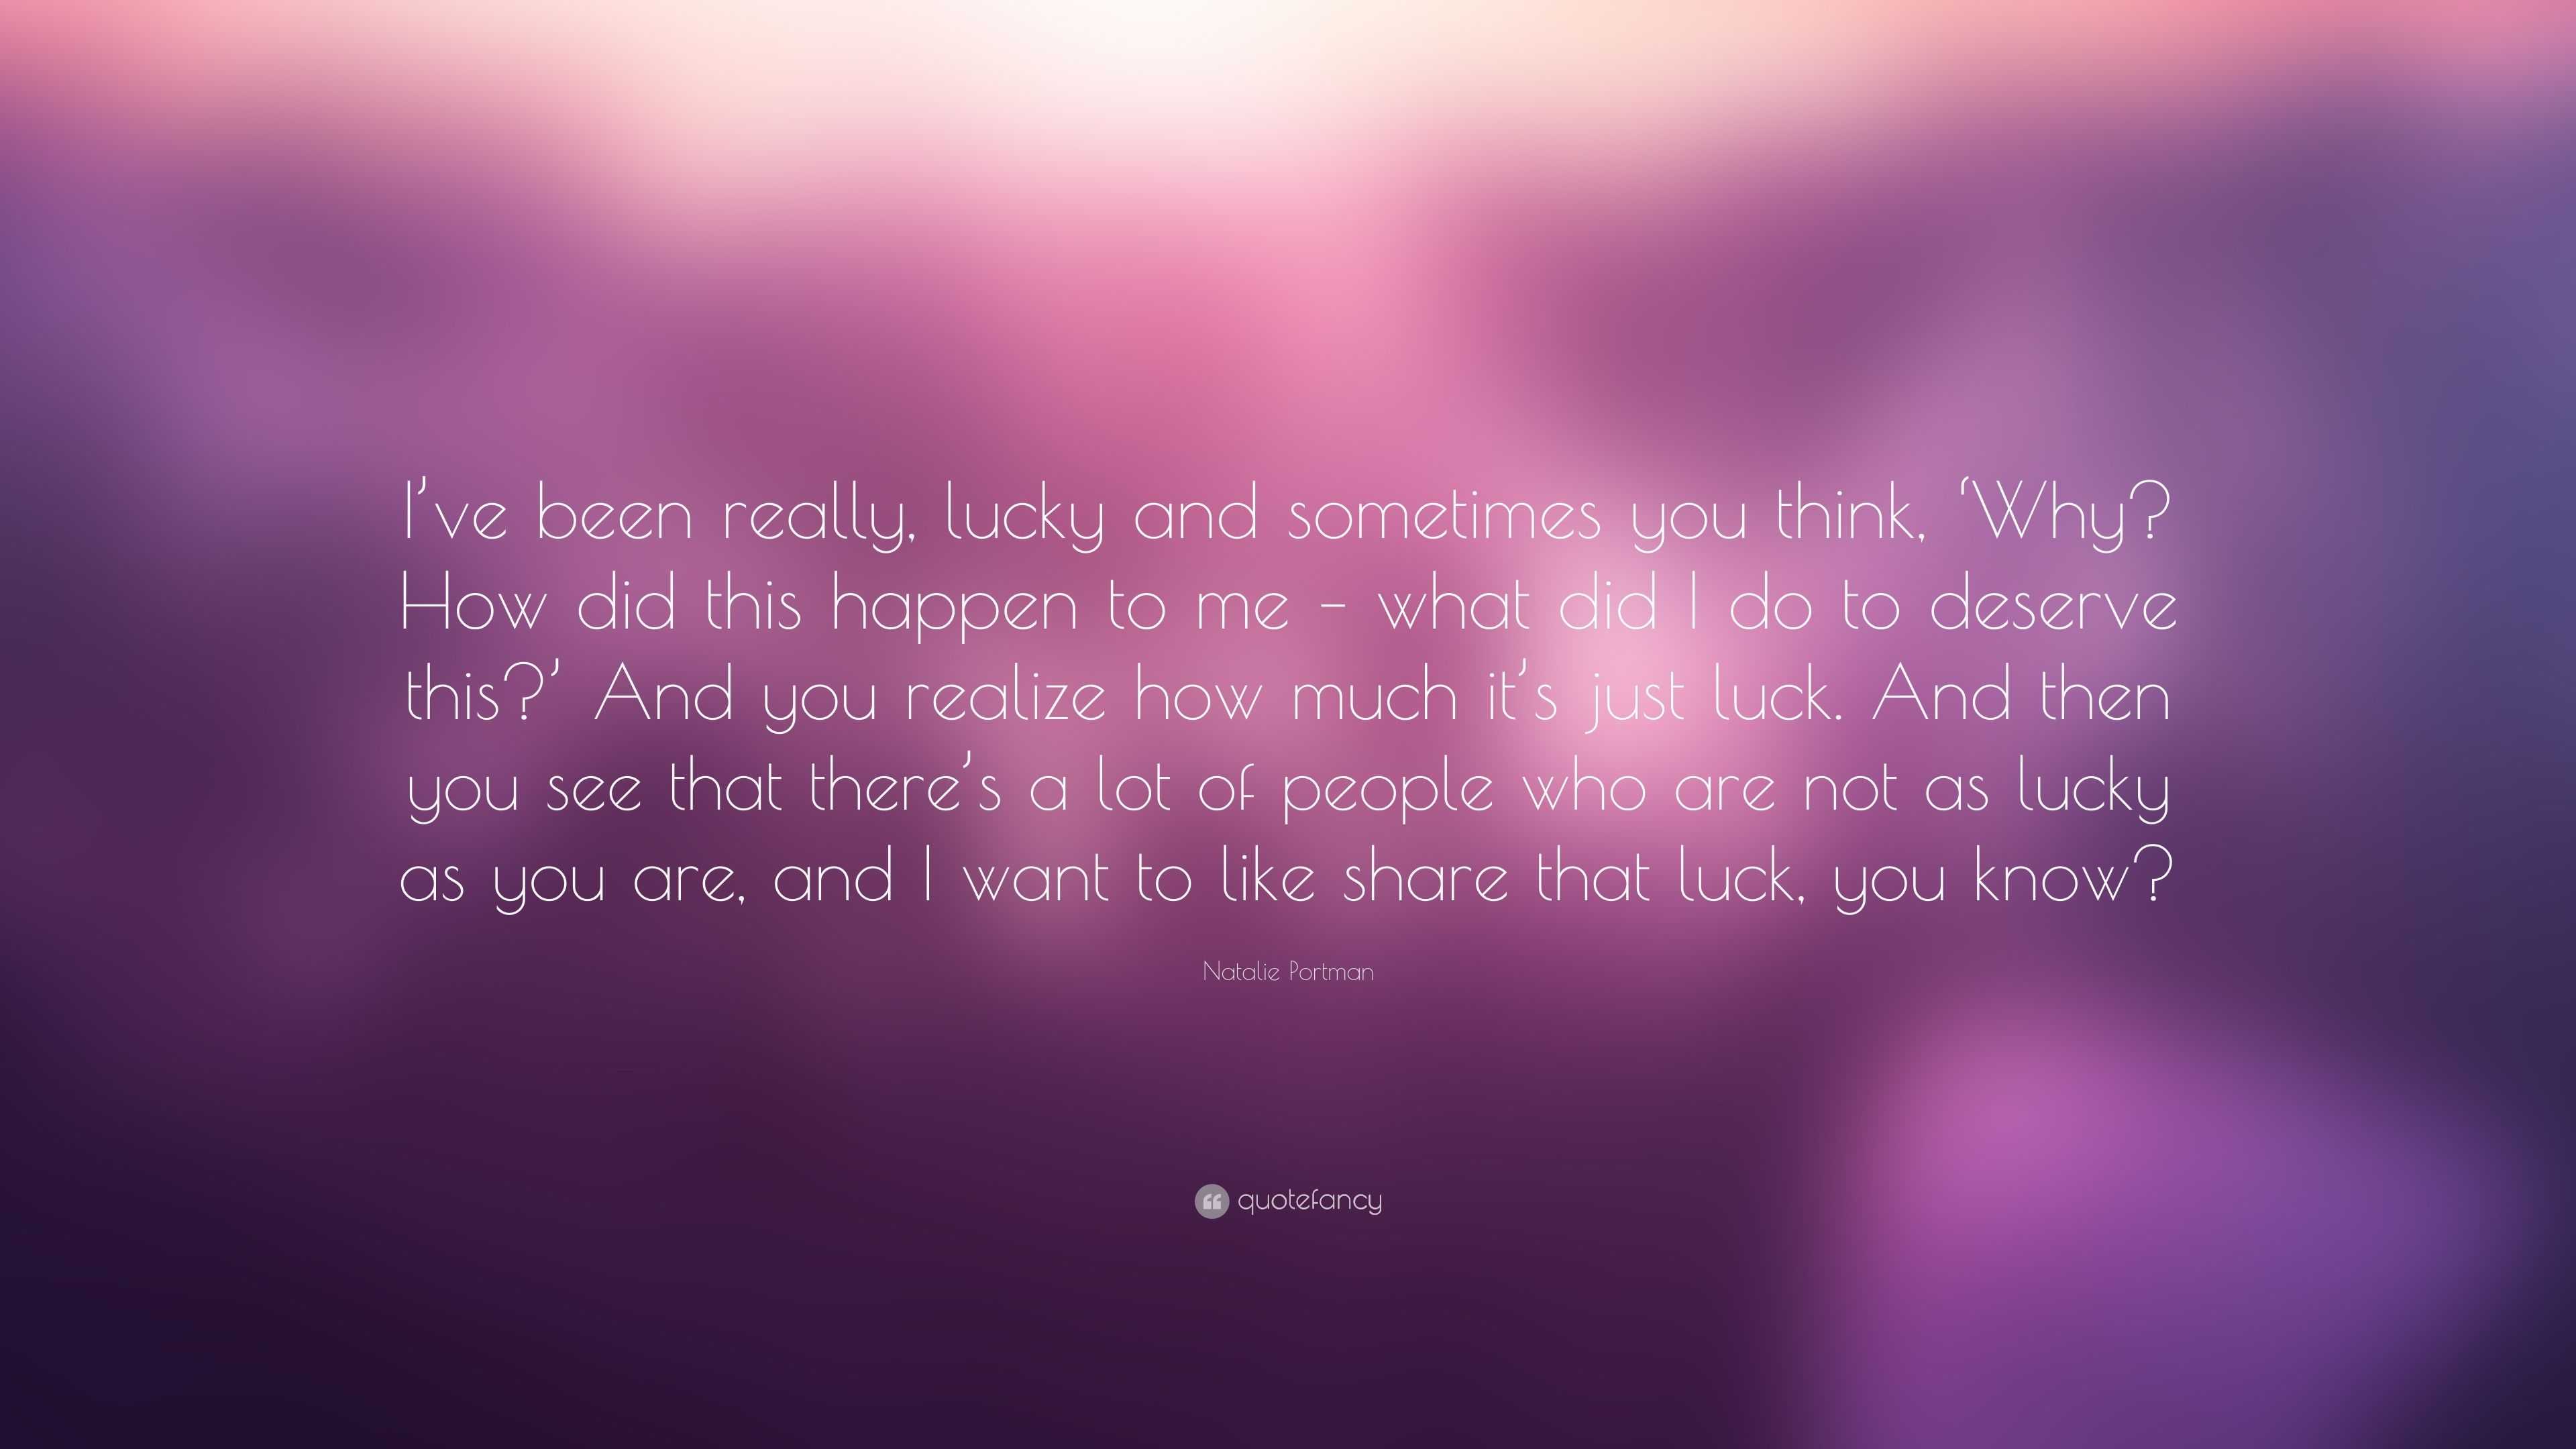 Natalie Portman Quote: “I've been really, lucky and sometimes you